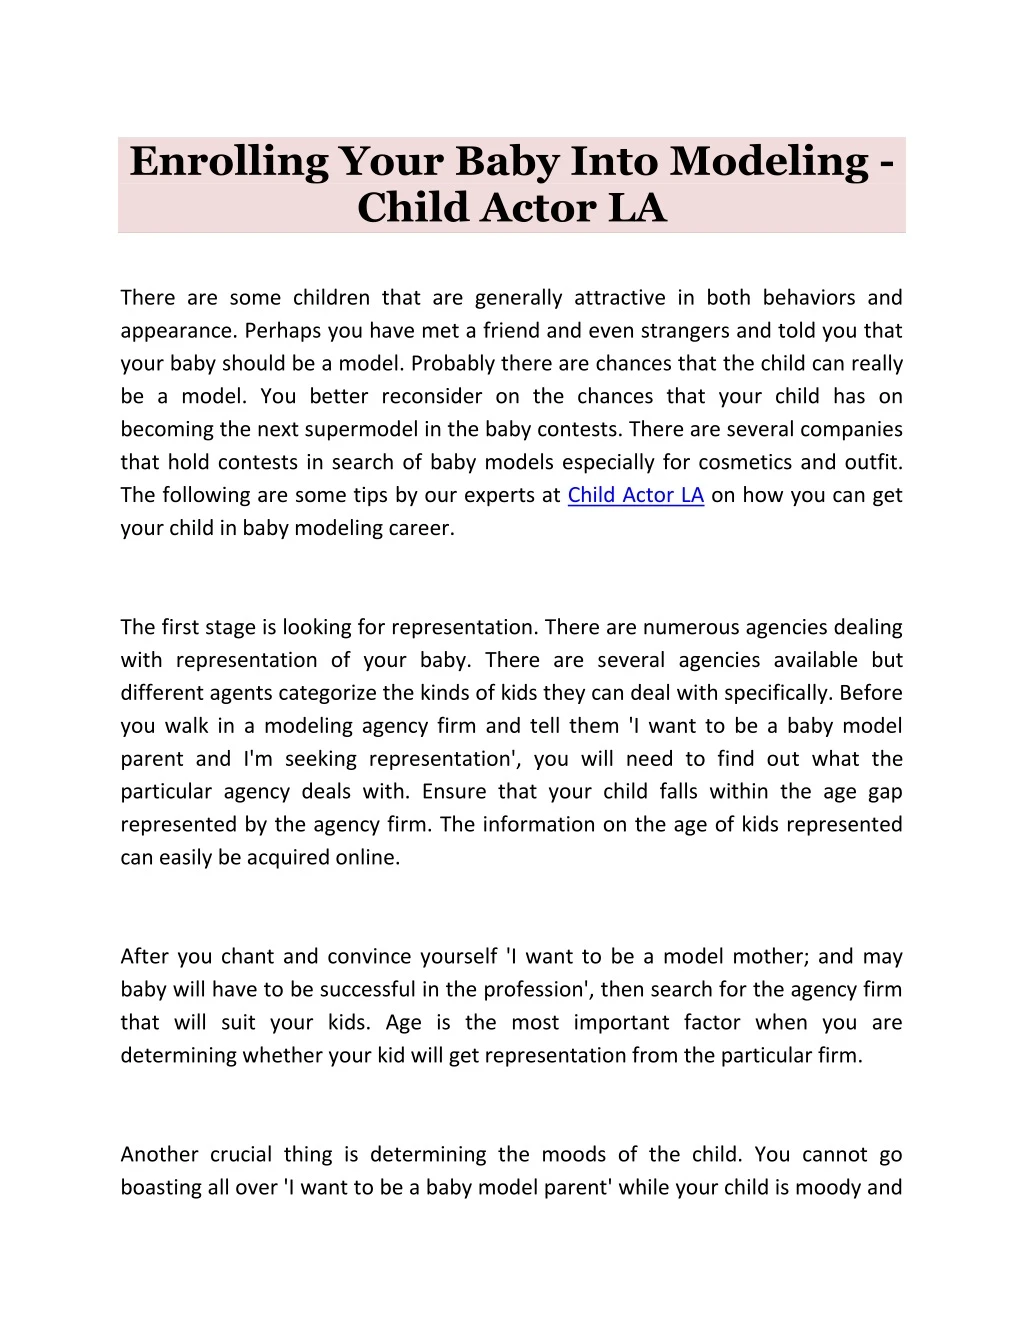 enrolling your baby into modeling child actor la